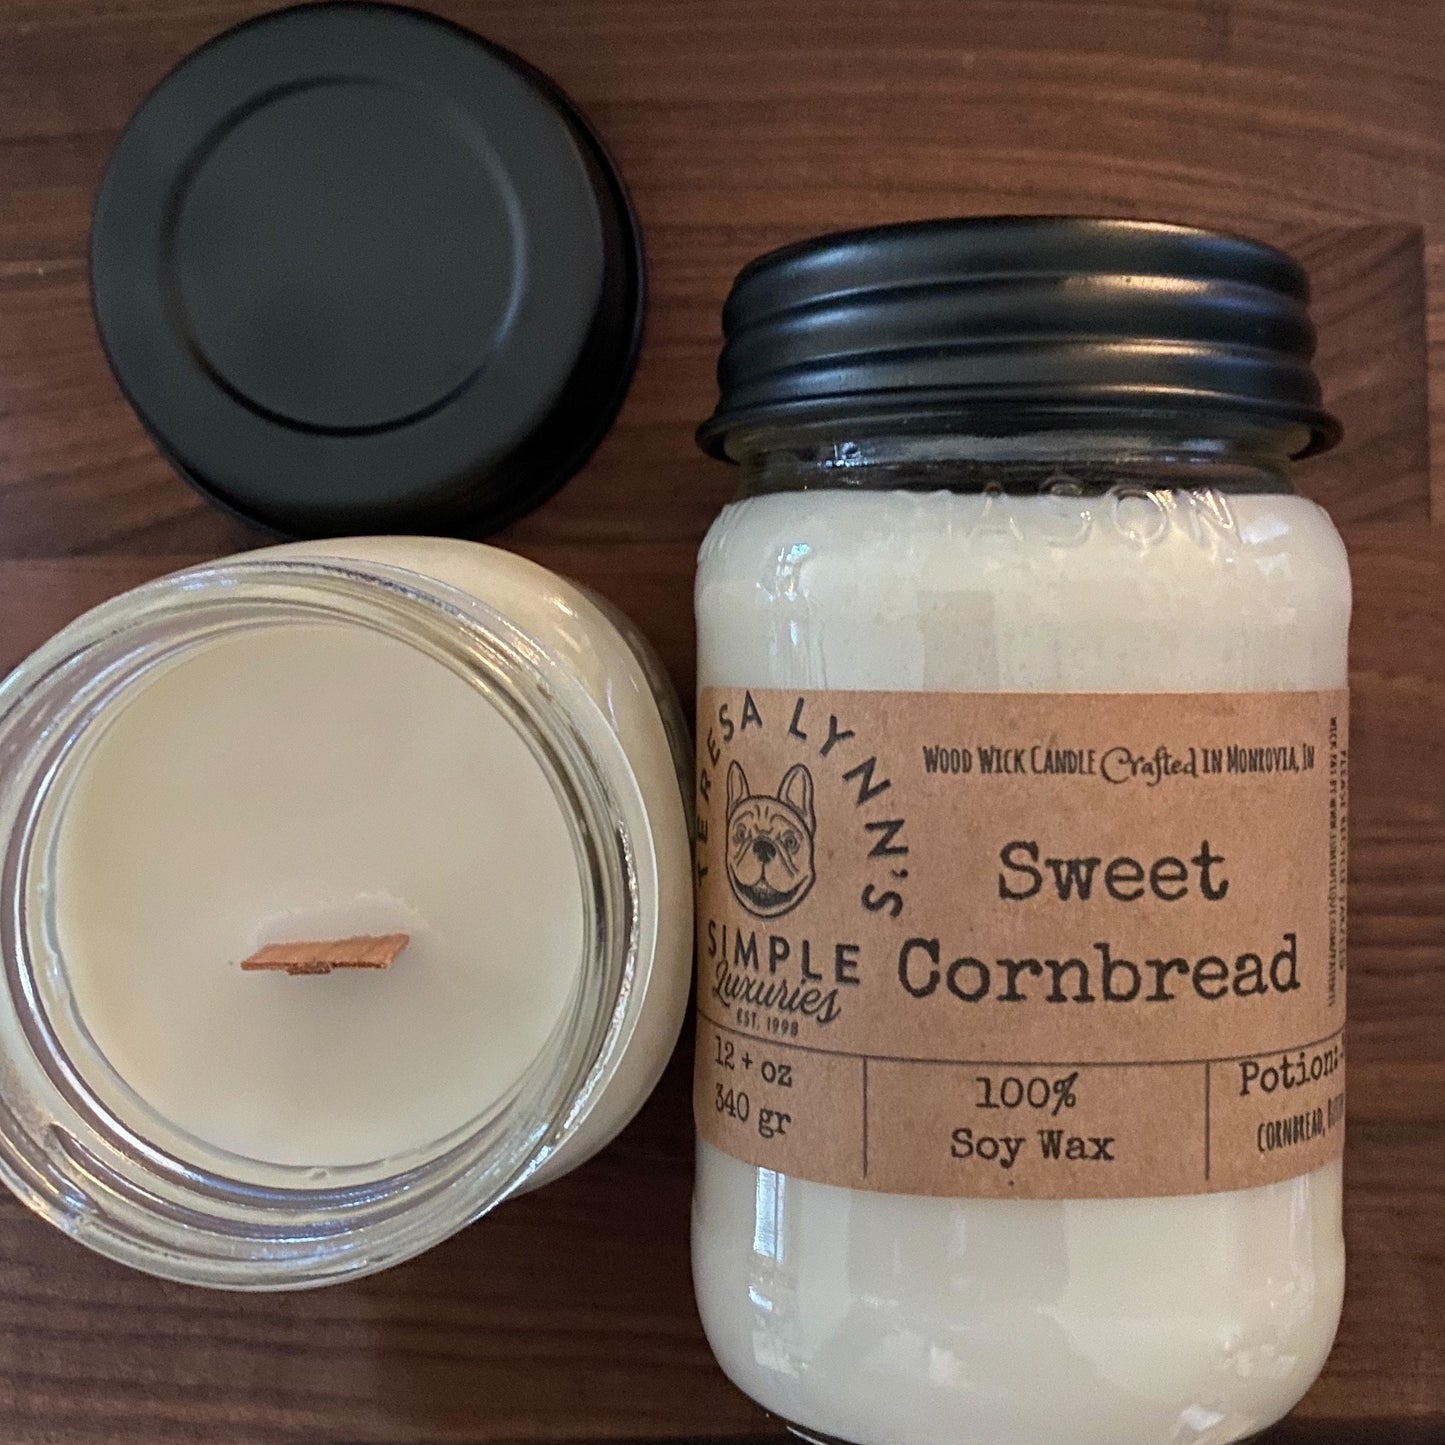 Sweet Cornbread, Soy, candle, wooden wick, Corn Muffin, Phthalate free, farmhouse, kitchen candle, clean burn, southern, primitive, gourmand